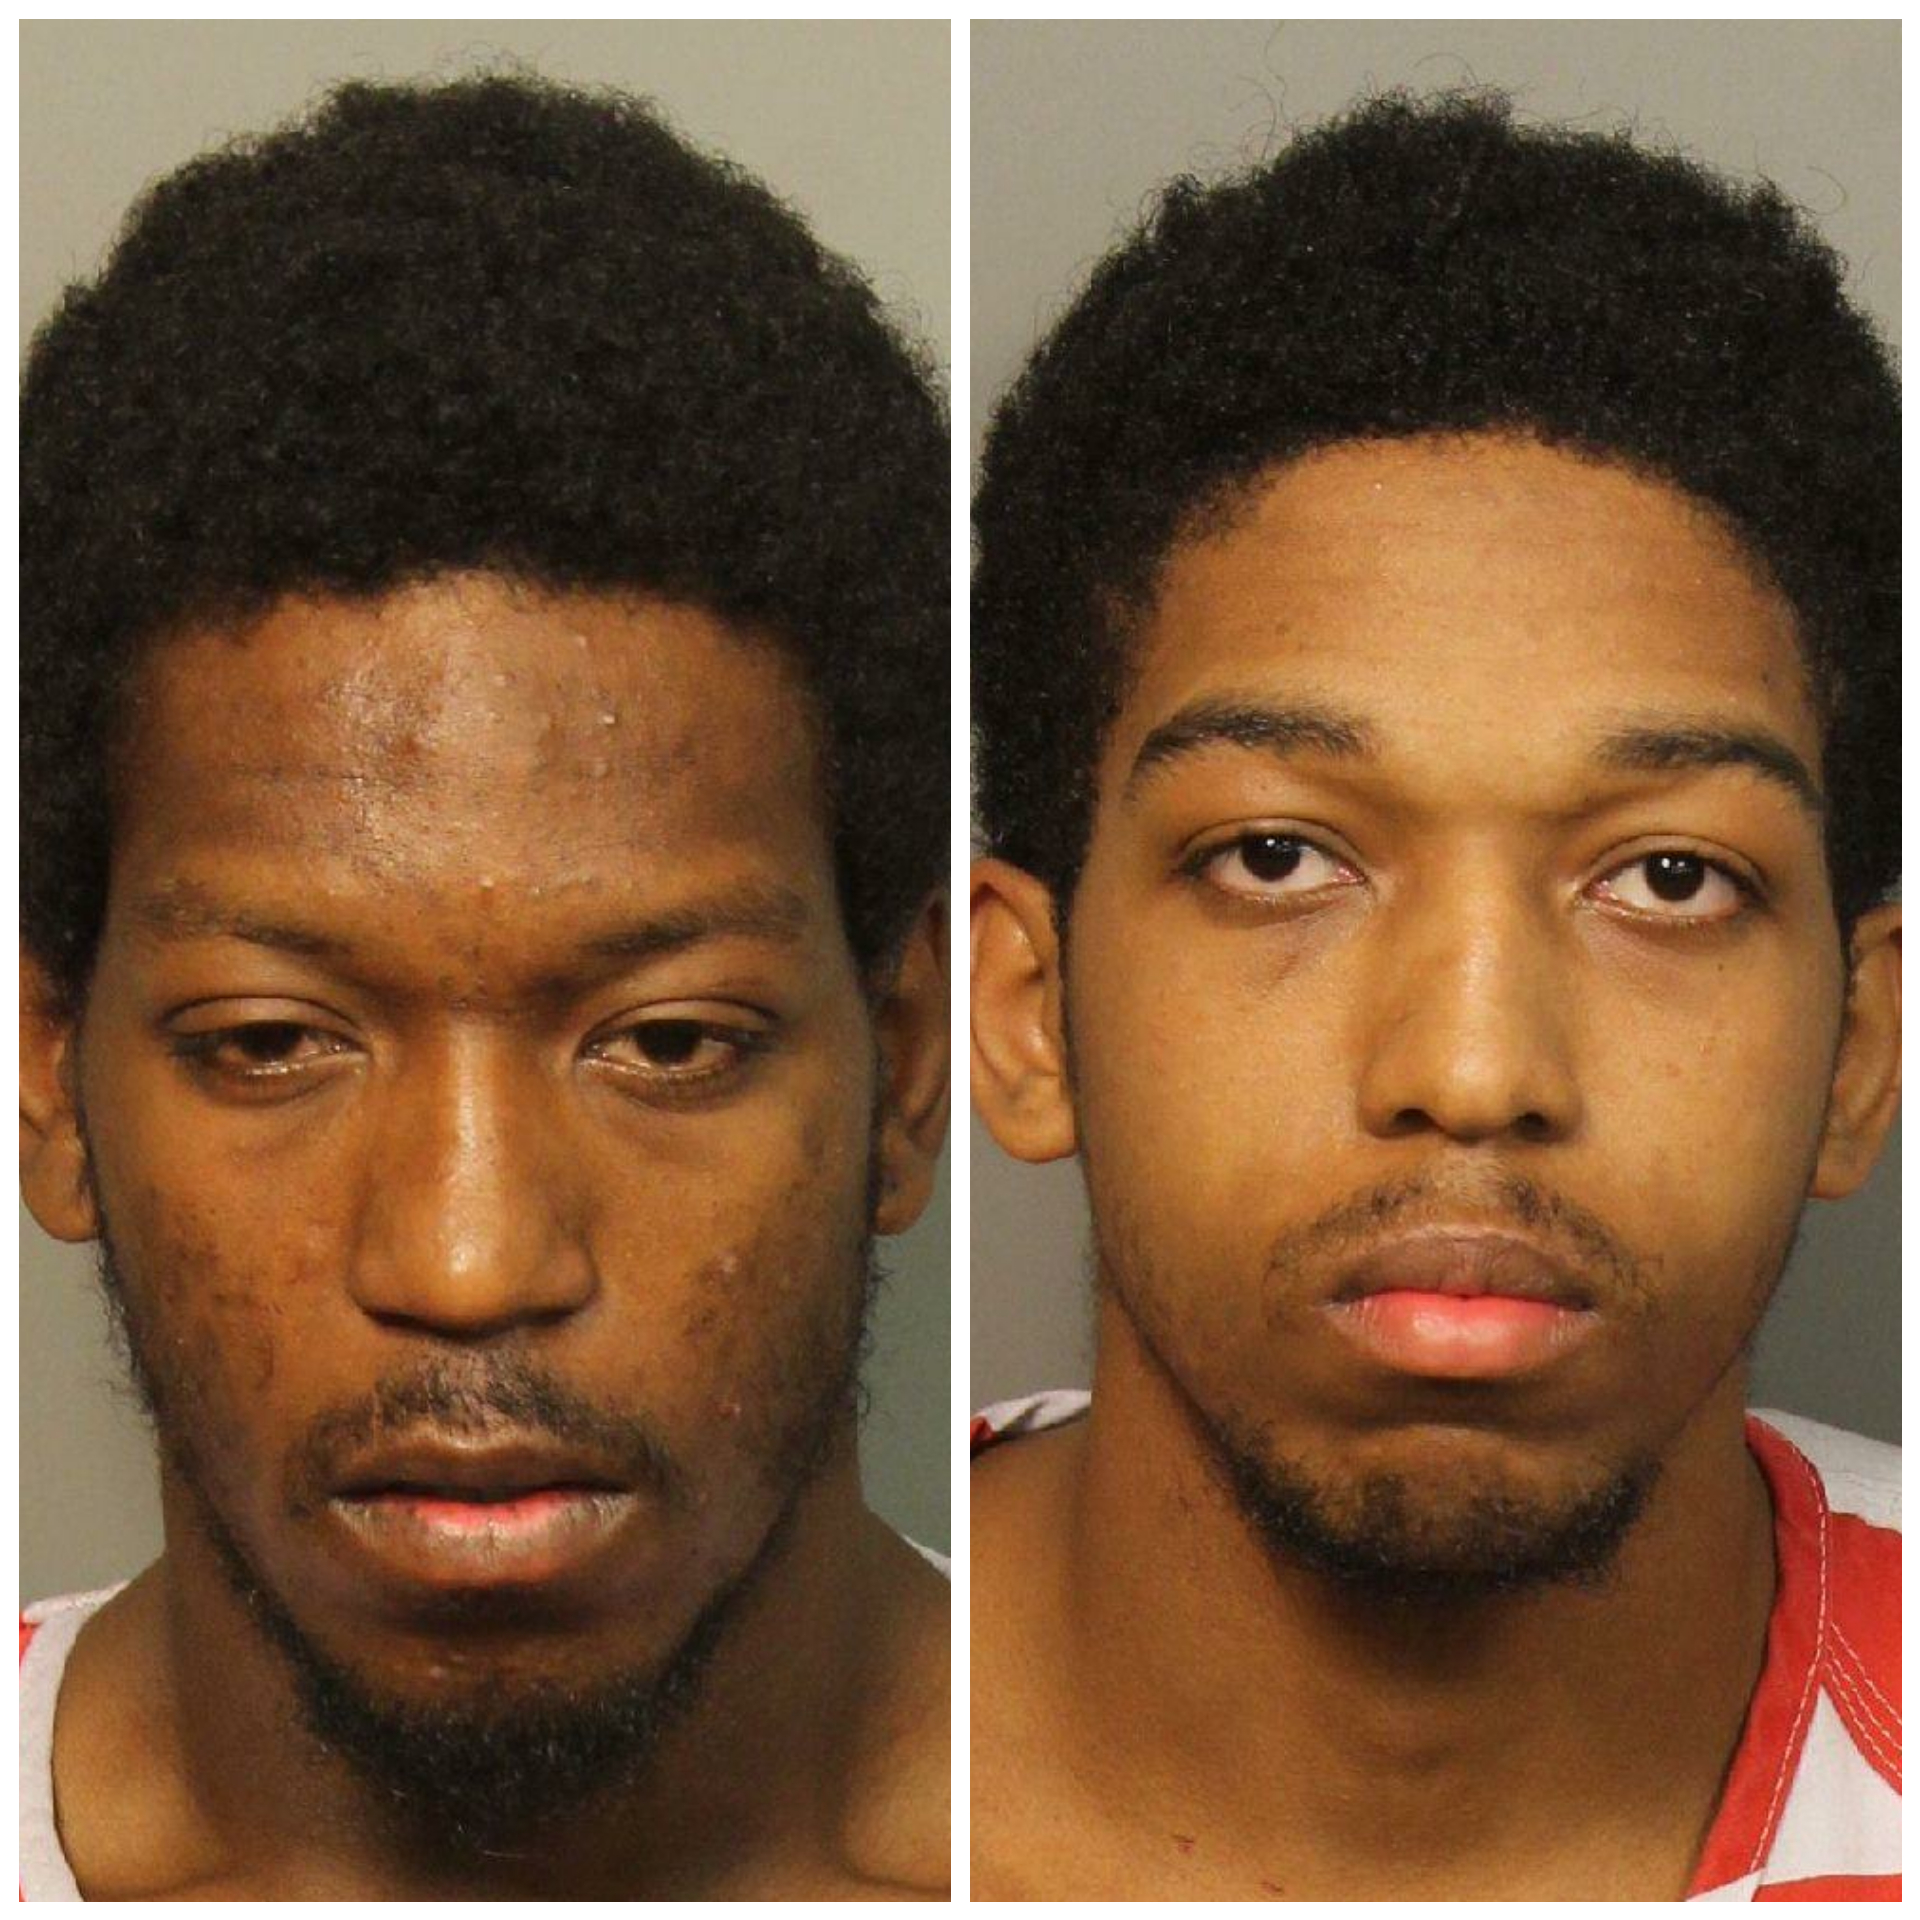 Brothers charged in March 23 murder of Birmingham man